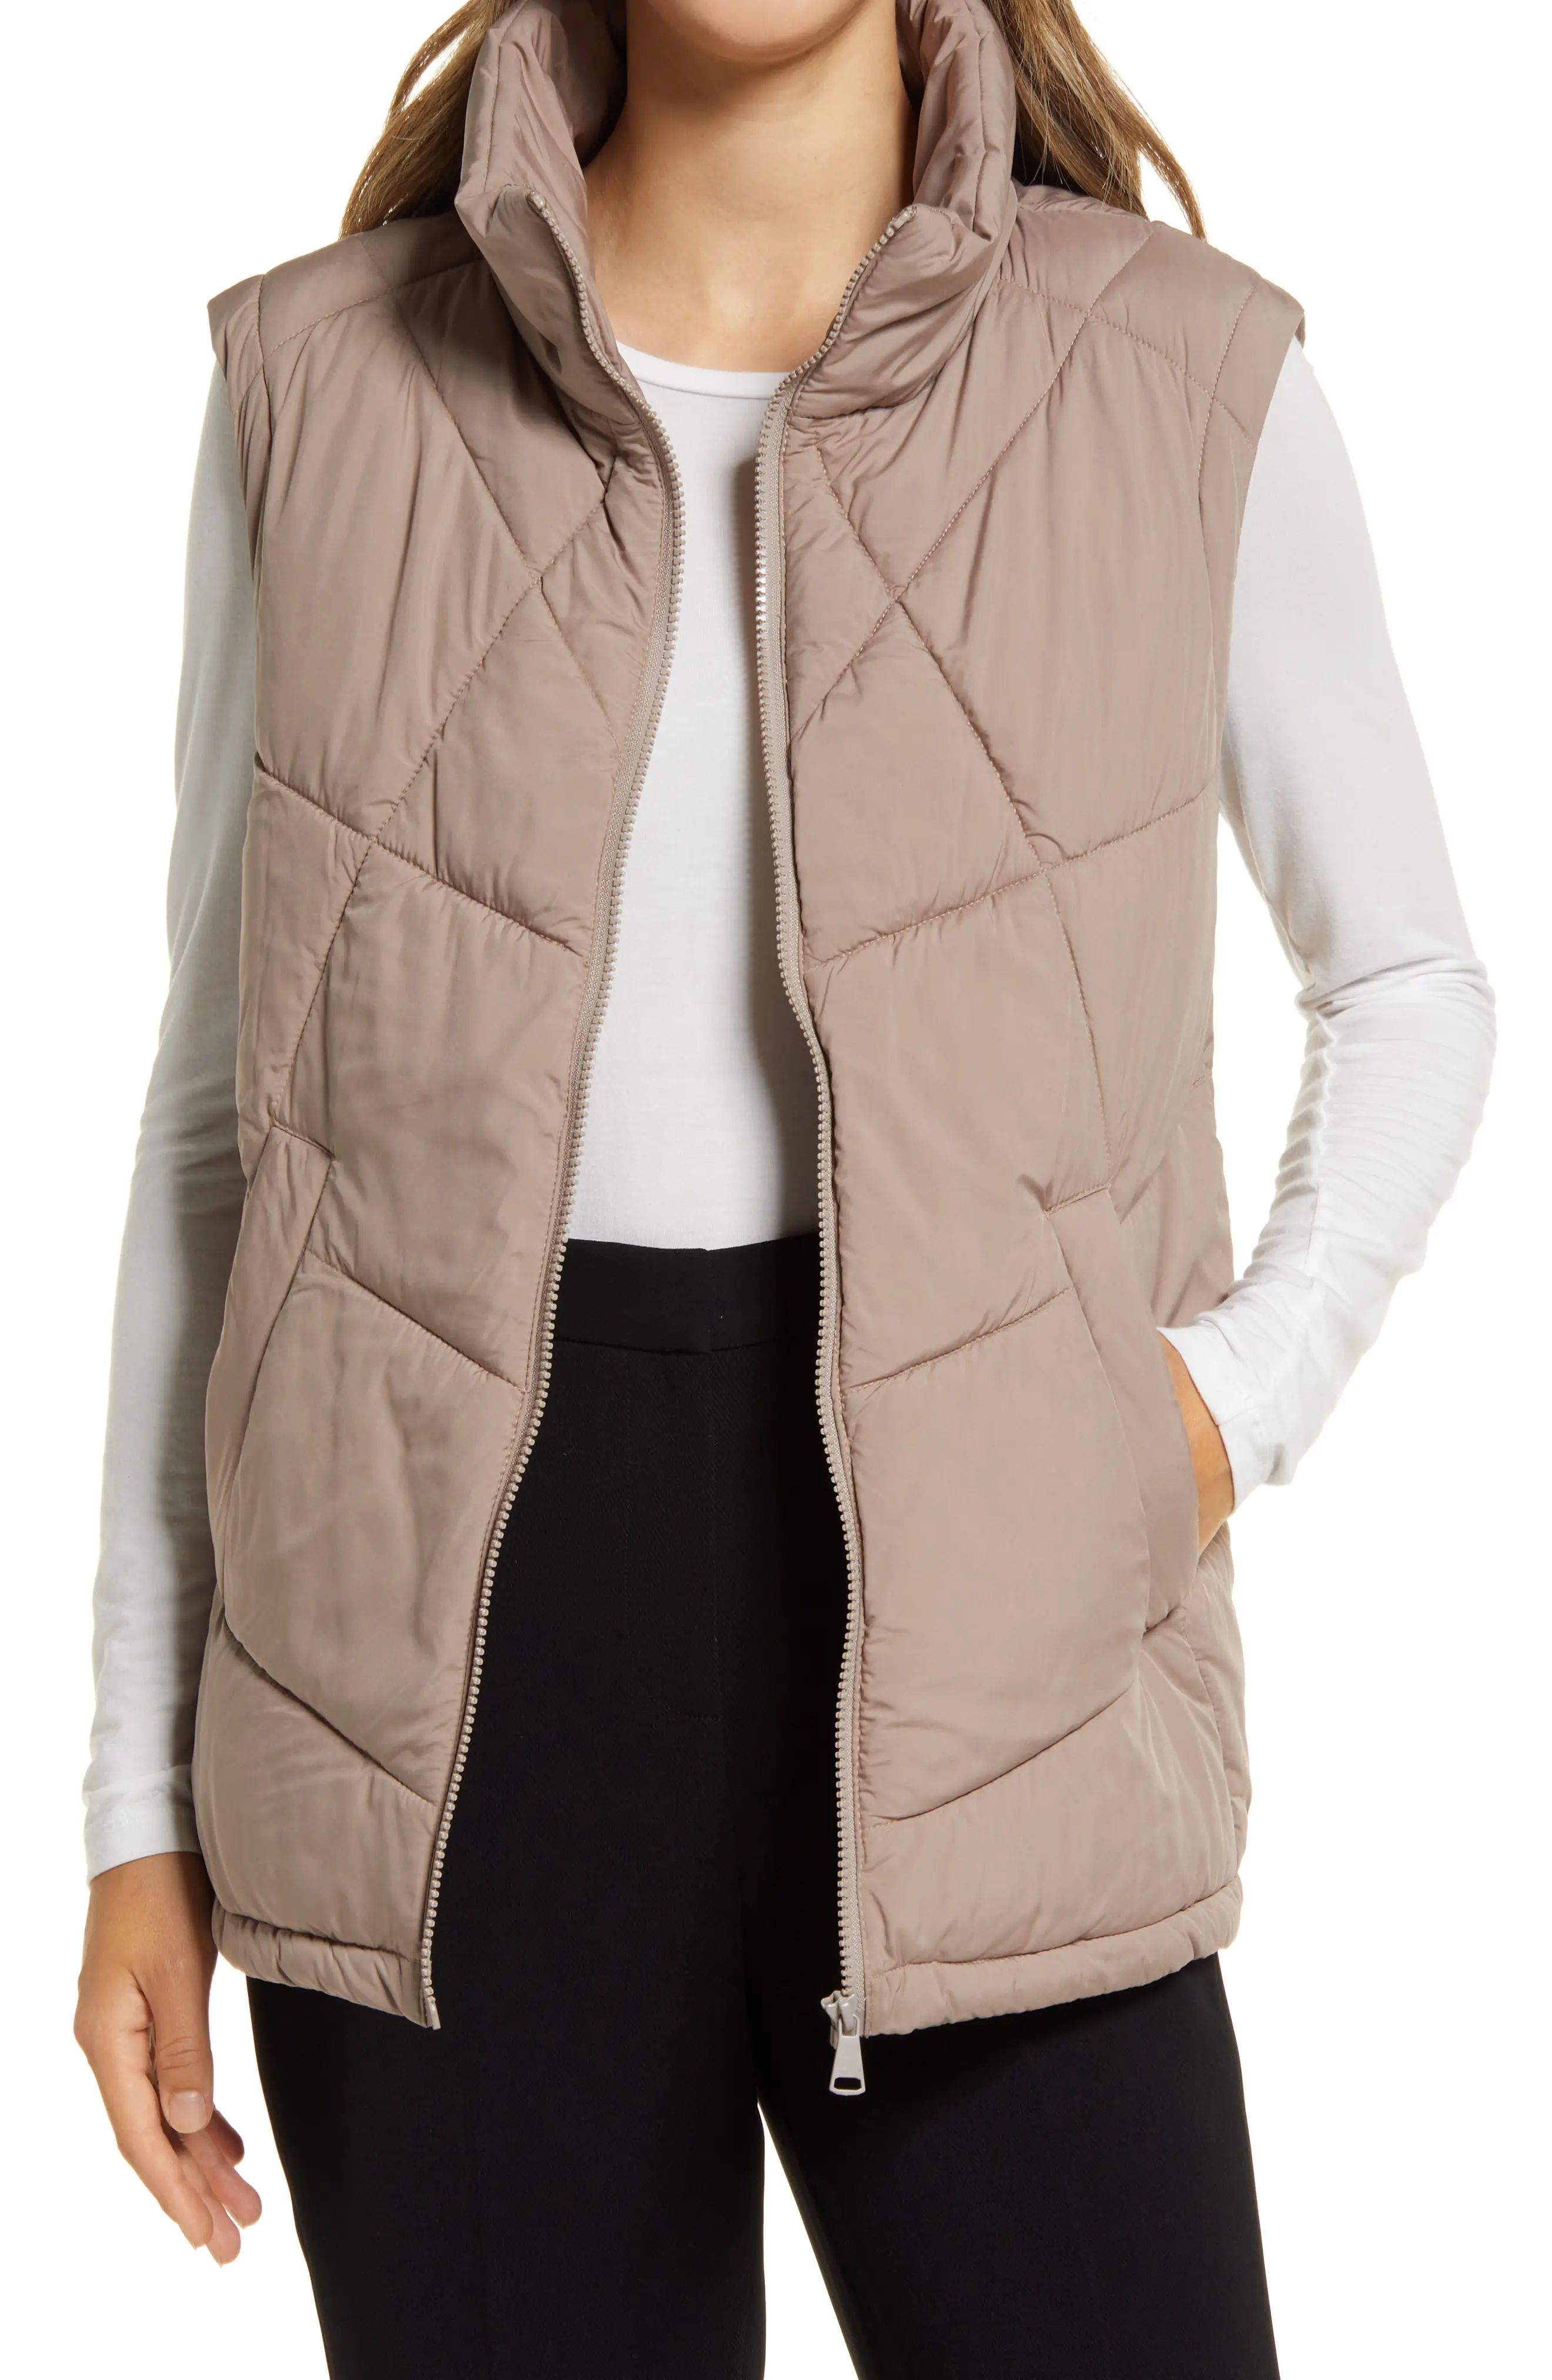 Nordstrom Women's Stand Collar Puffer Vest in Tan Iced Coffee at Nordstrom, Size Medium | Nordstrom